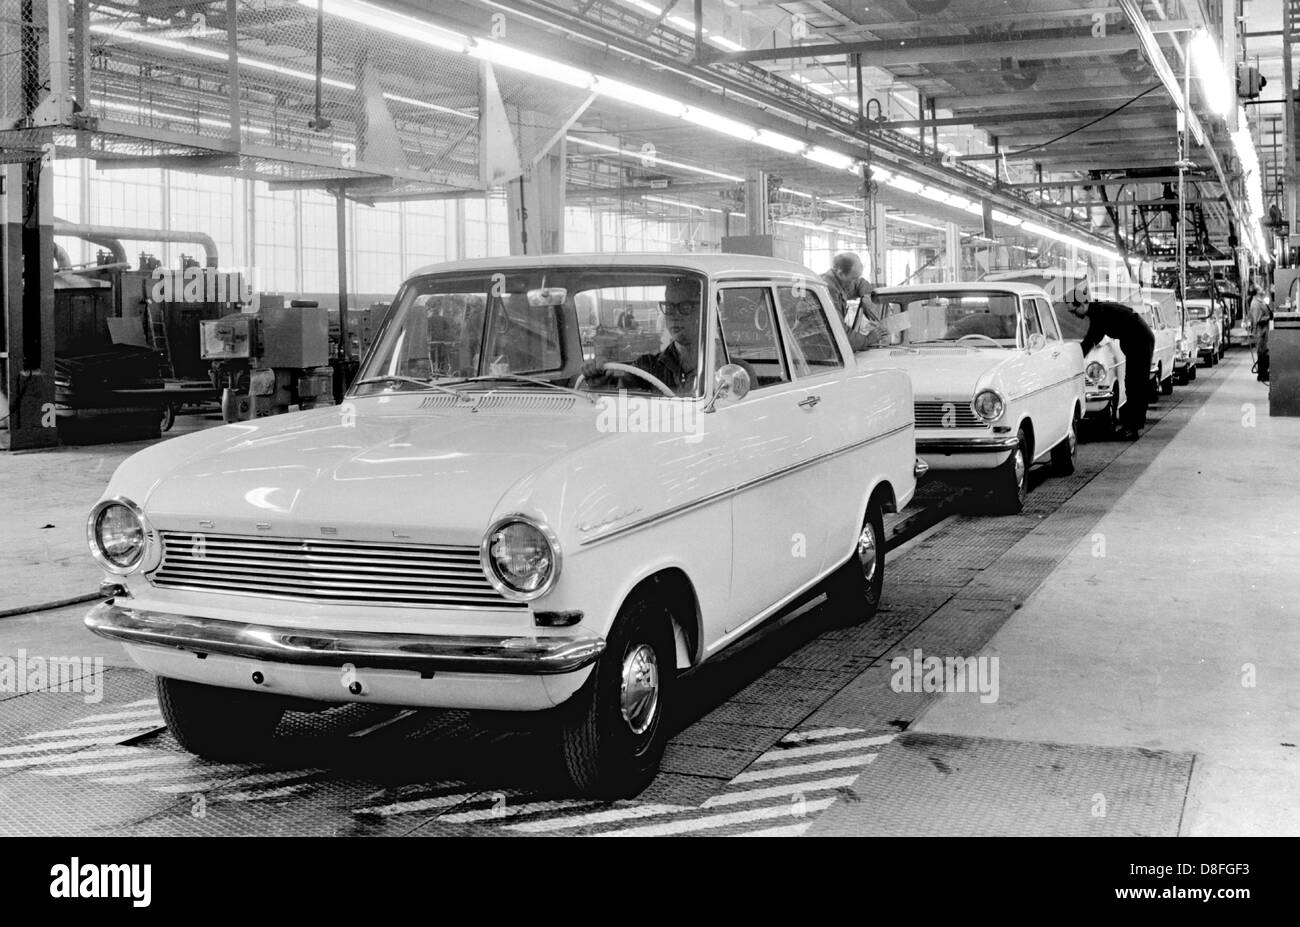 Completed Opel cars of the type Kadett roll off the line in the Opel factory in Ruesselsheim in 1962. Stock Photo